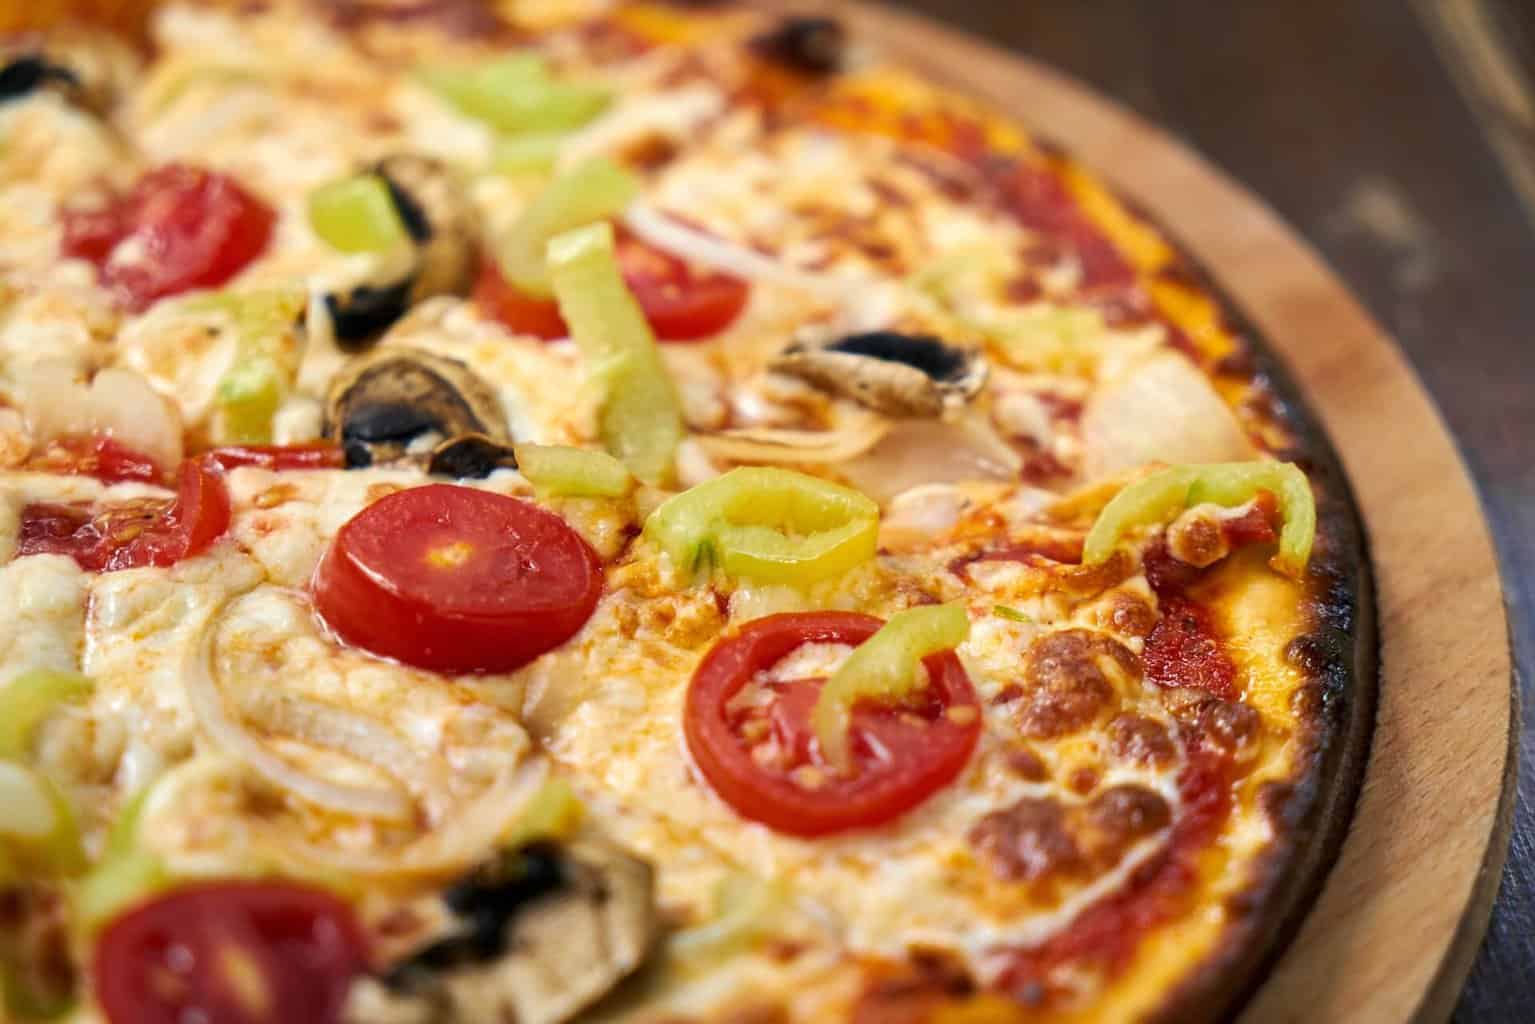 Picture of a pizza with tomatoes and peppers